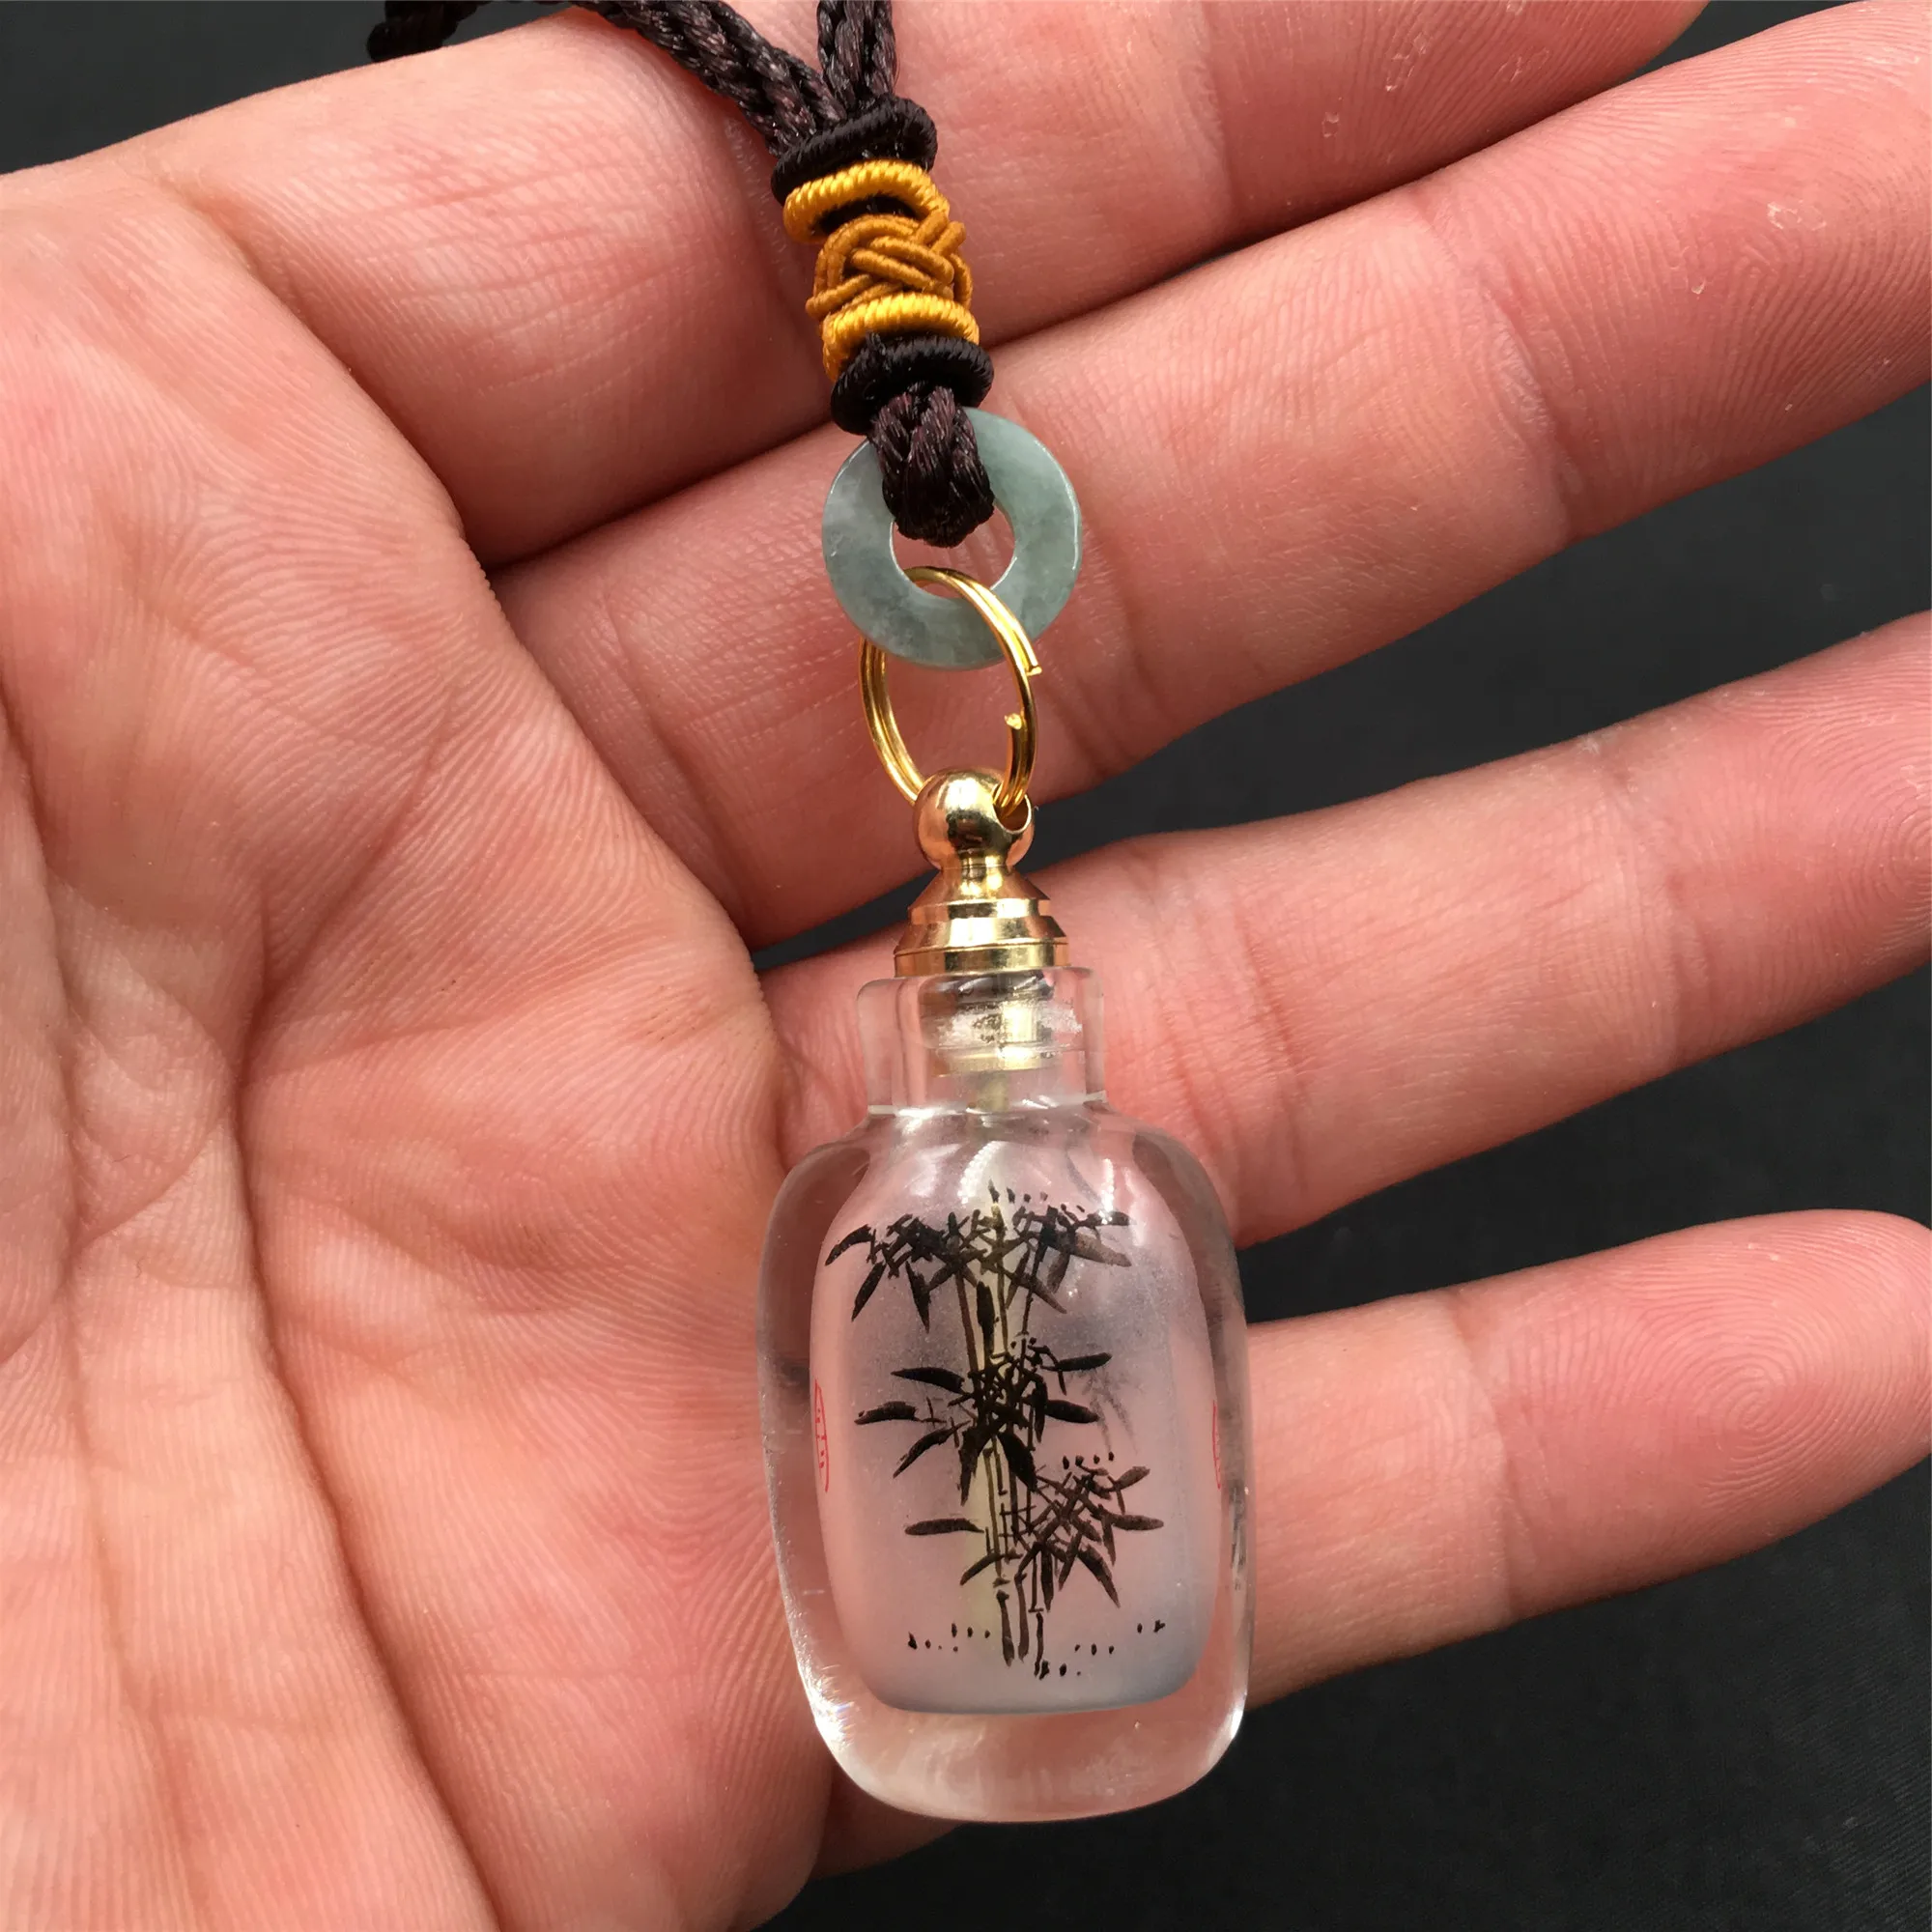 Snuff Vial with Spoon Necklace Pendant + Spoon Inside Lid